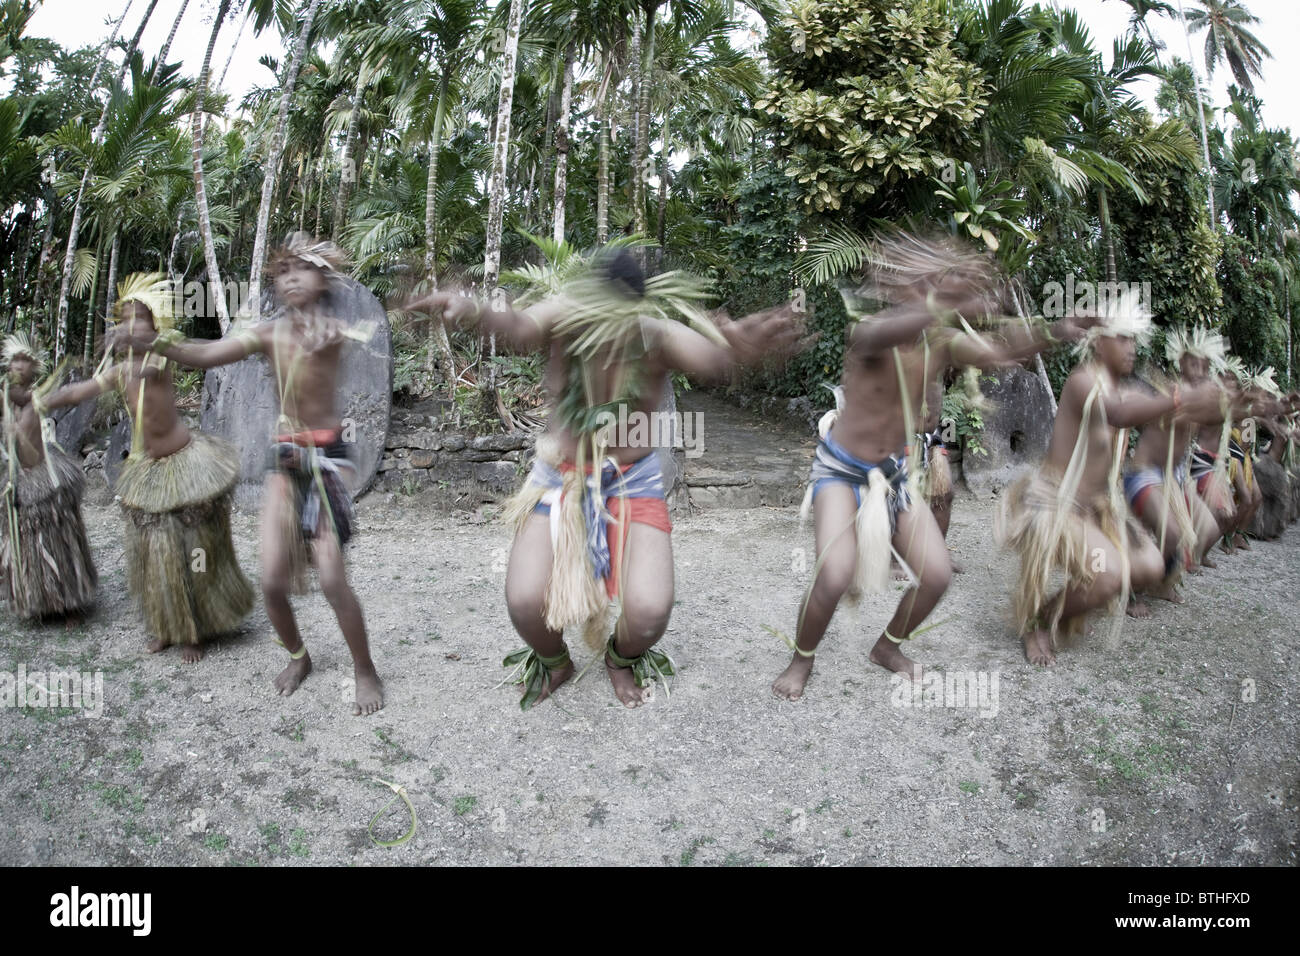 Yapese villagers perform a traditional Yapese dance. Yap, Federated States of Micronesia, Pacific Ocean. Stock Photo